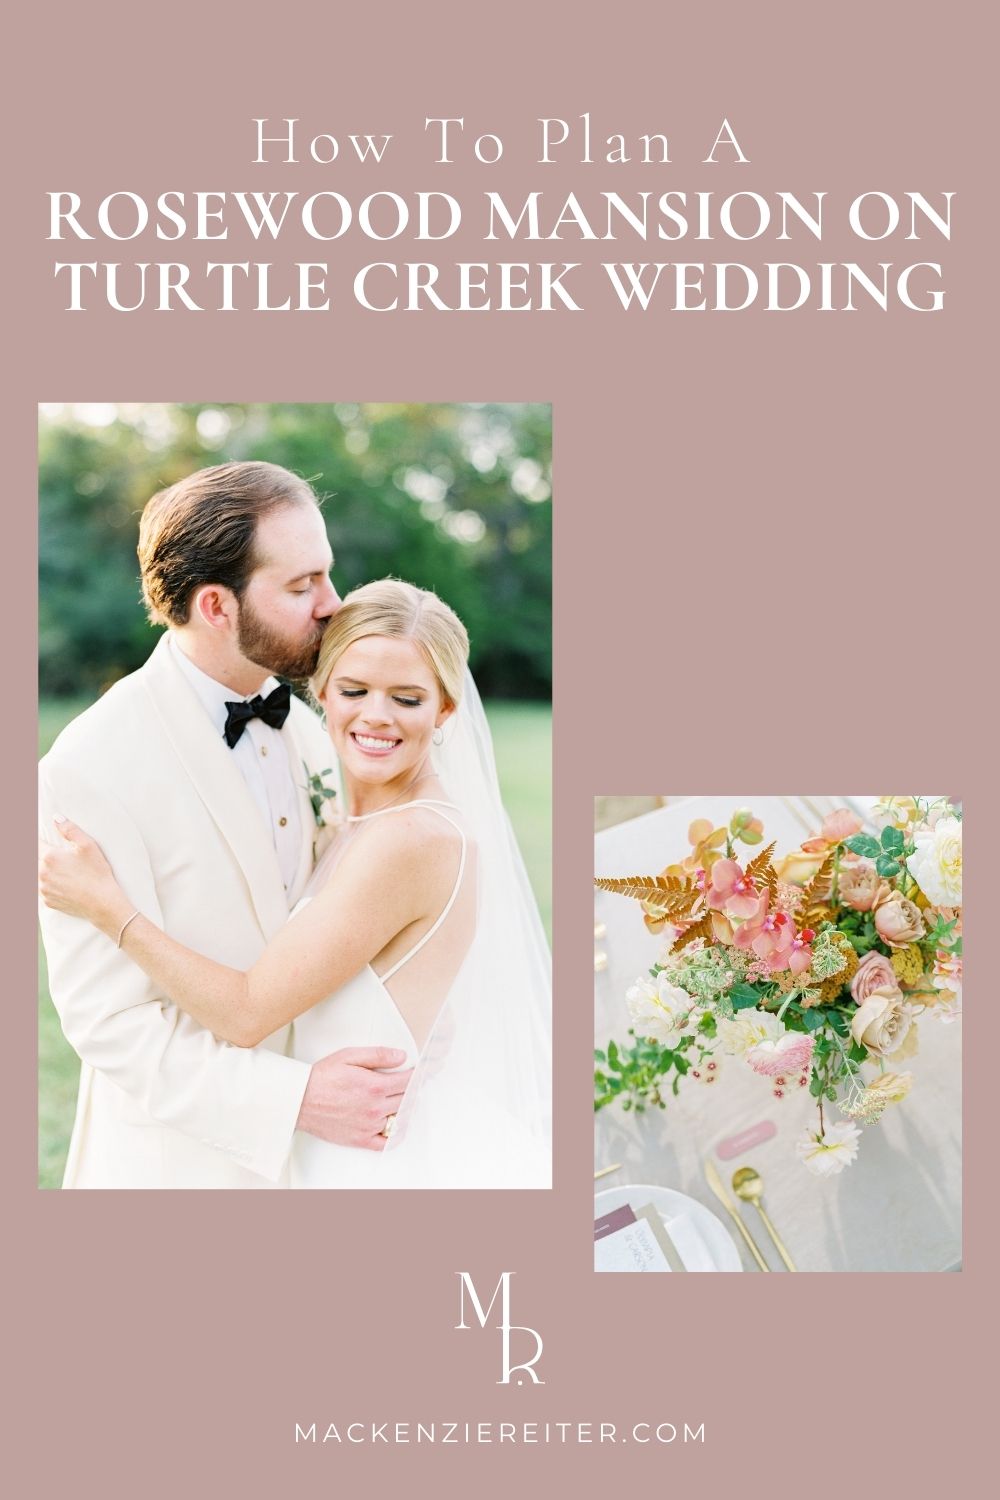 Collage of photos of the bride and groom and the floral centerpiece; image overlaid with text that reads How to Plan a Wedding at Rosewood Mansion on Turtle Creek